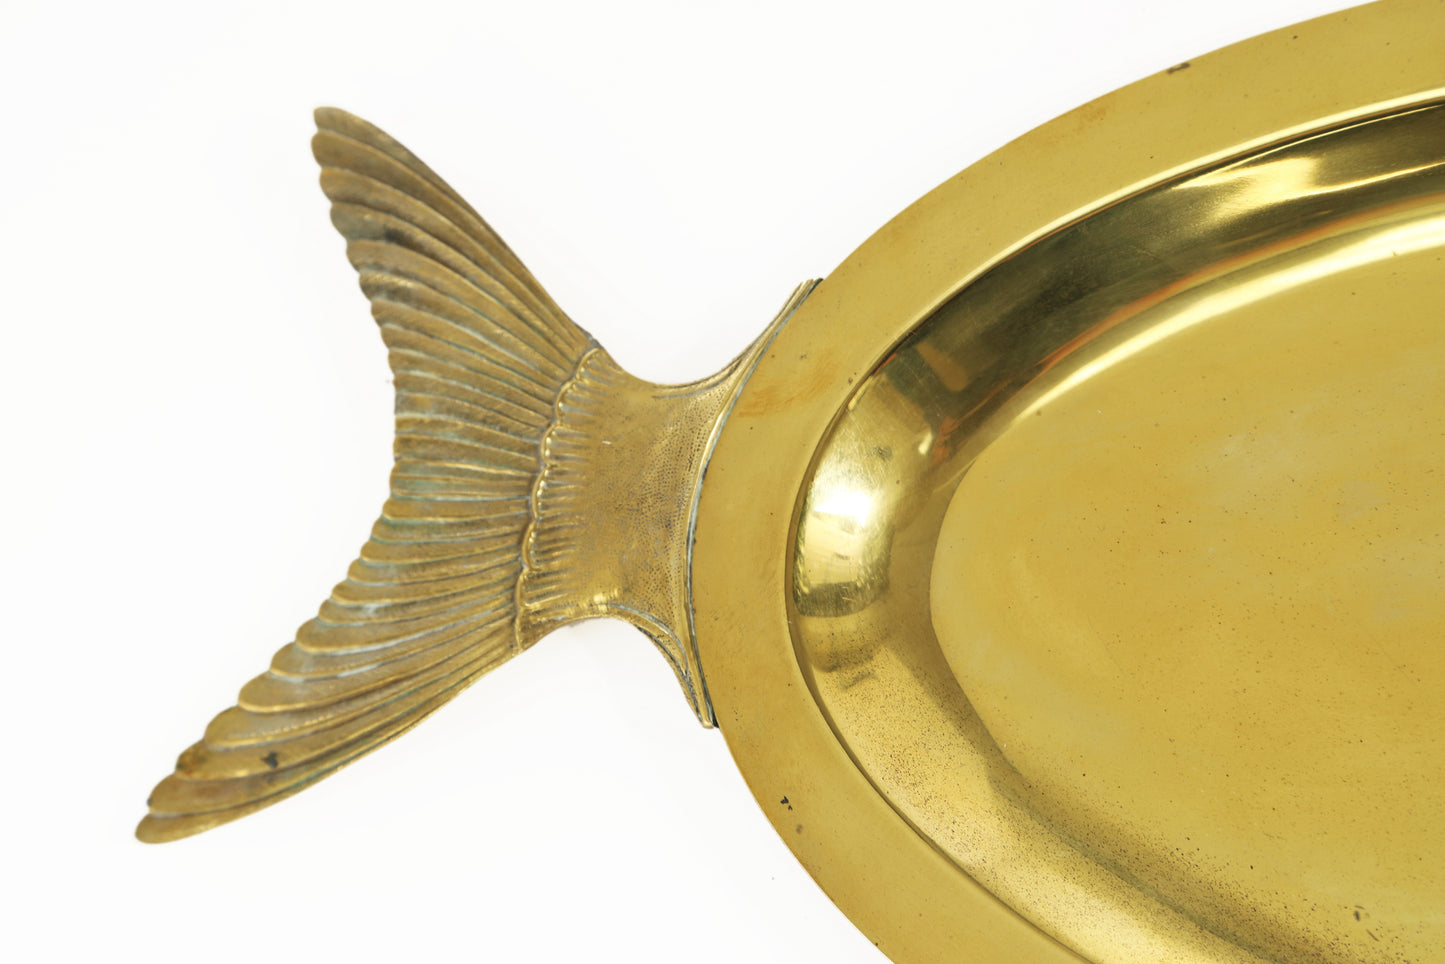 Fish-shaped serving tray from the 70s